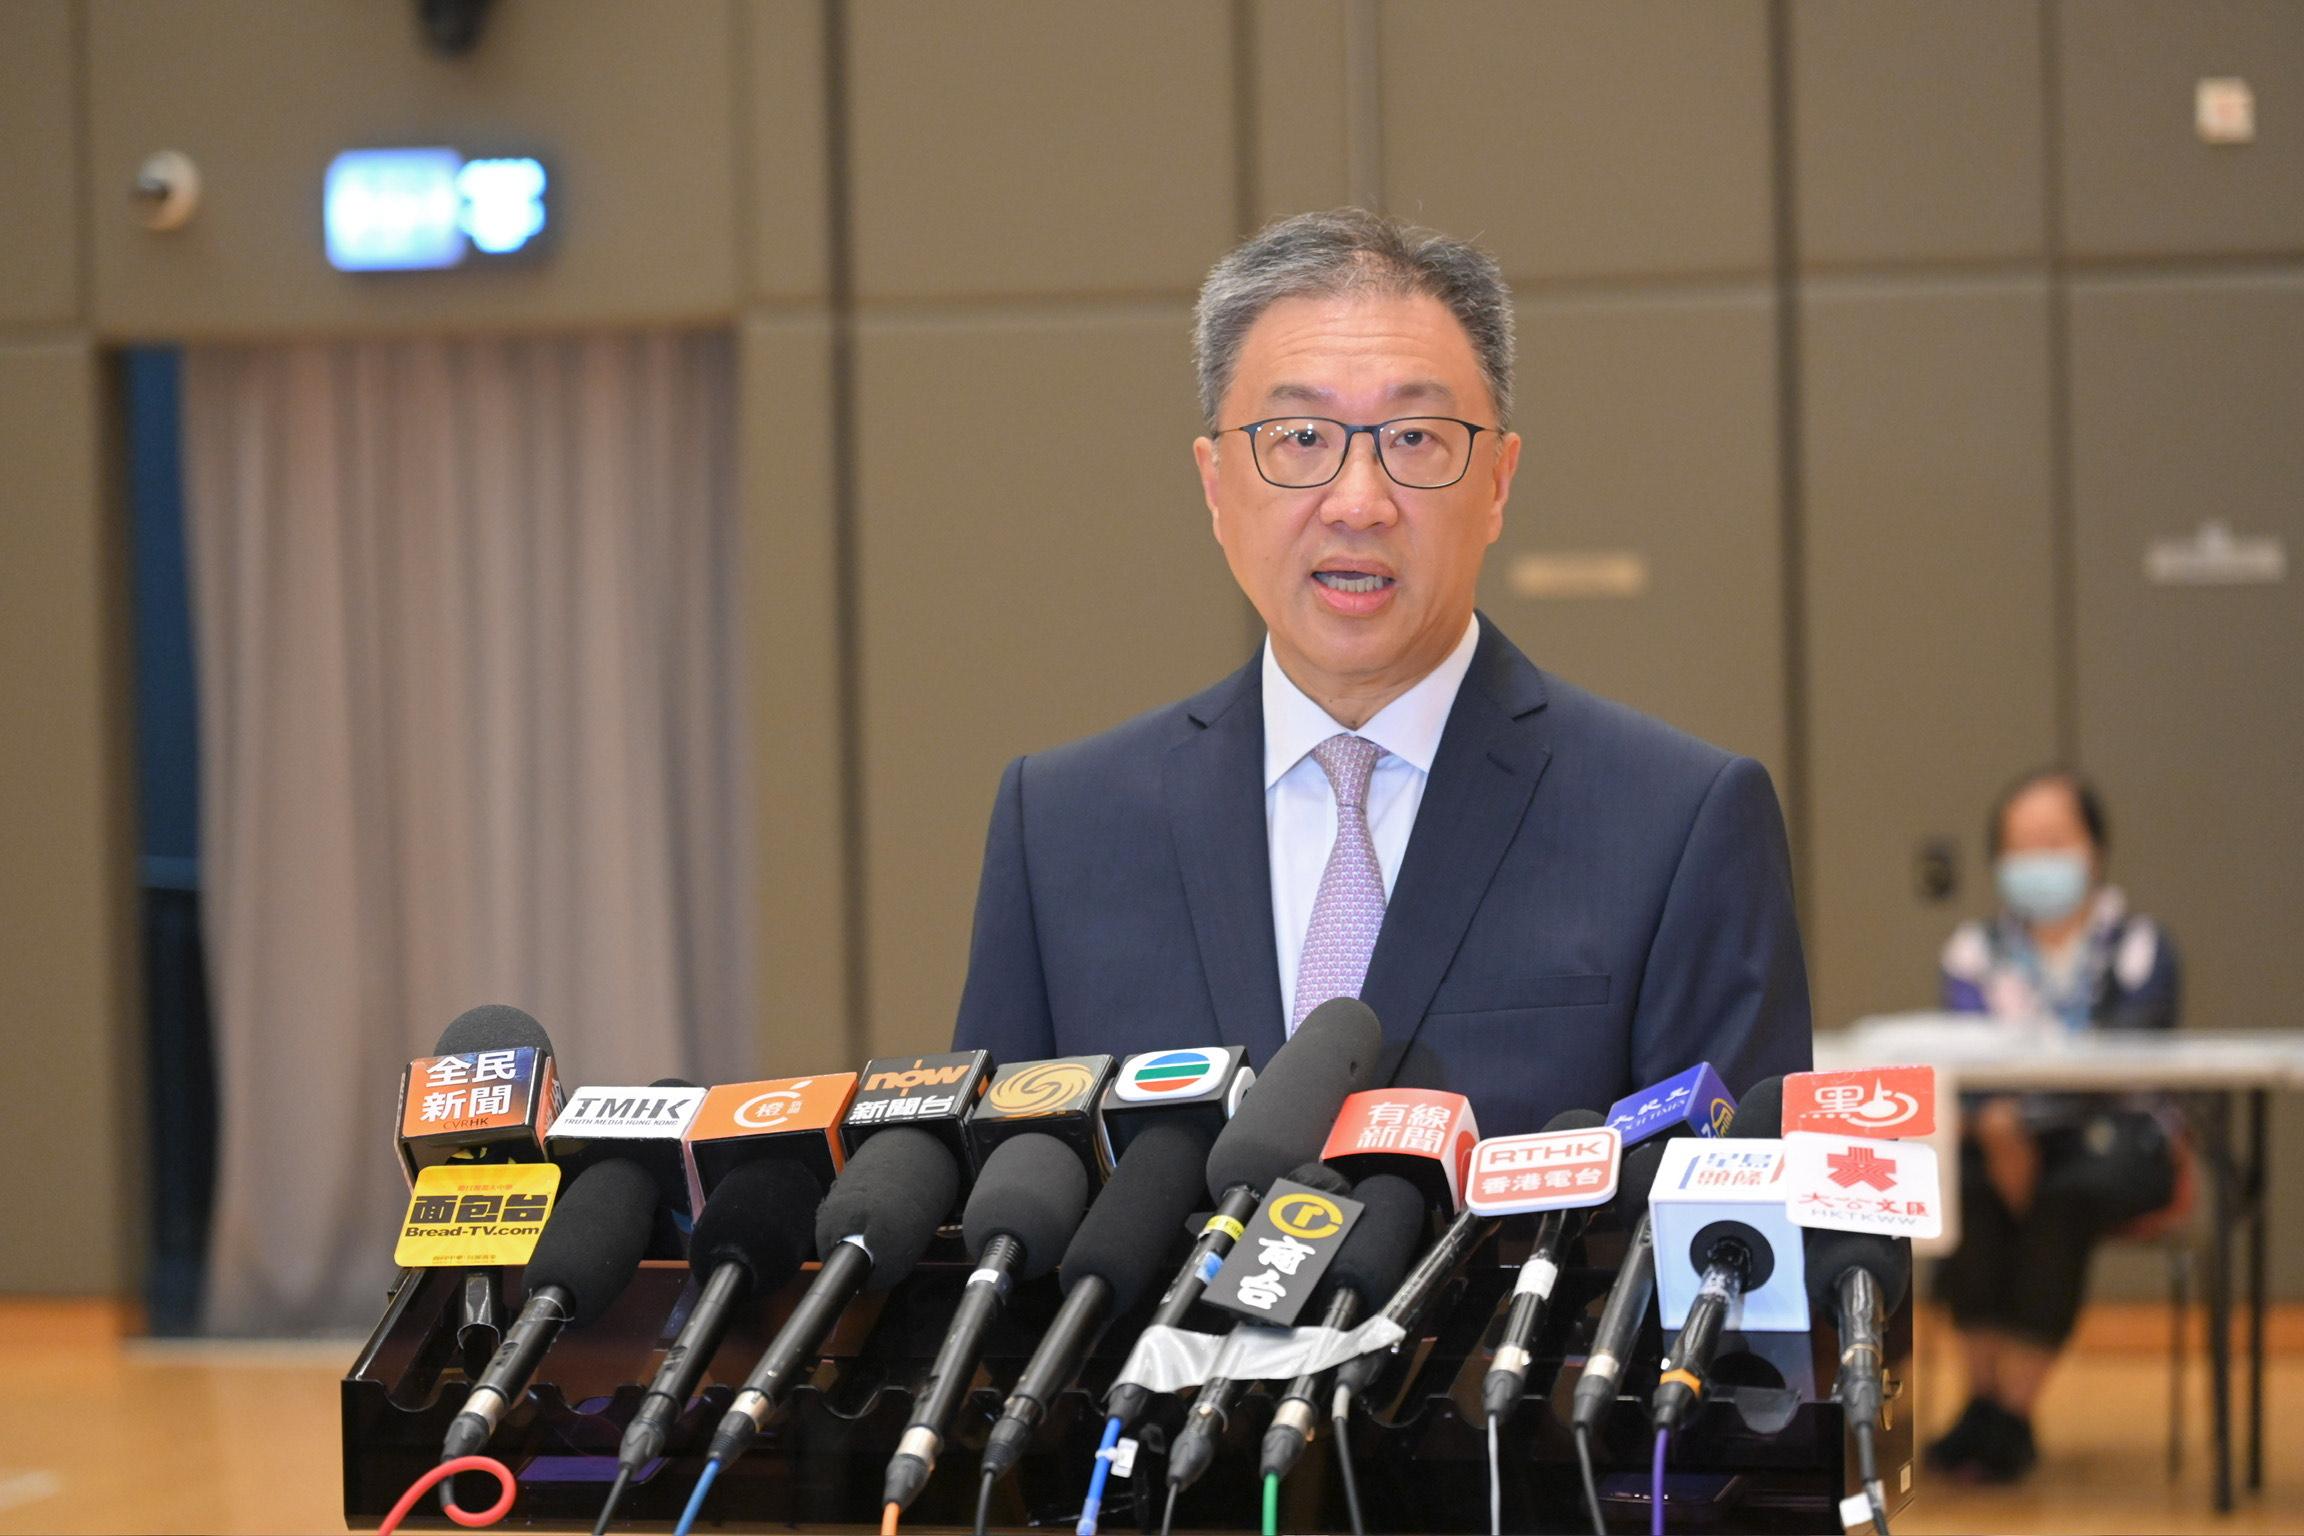 The Chairman of the Electoral Affairs Commission, Mr Justice David Lok, demonstrated the proper polling procedures of the District Council Ordinary Election during his visit to a mock polling station at the North Point Community Hall today (December 5). Photo shows Mr Justice Lok meeting the media after the visit.